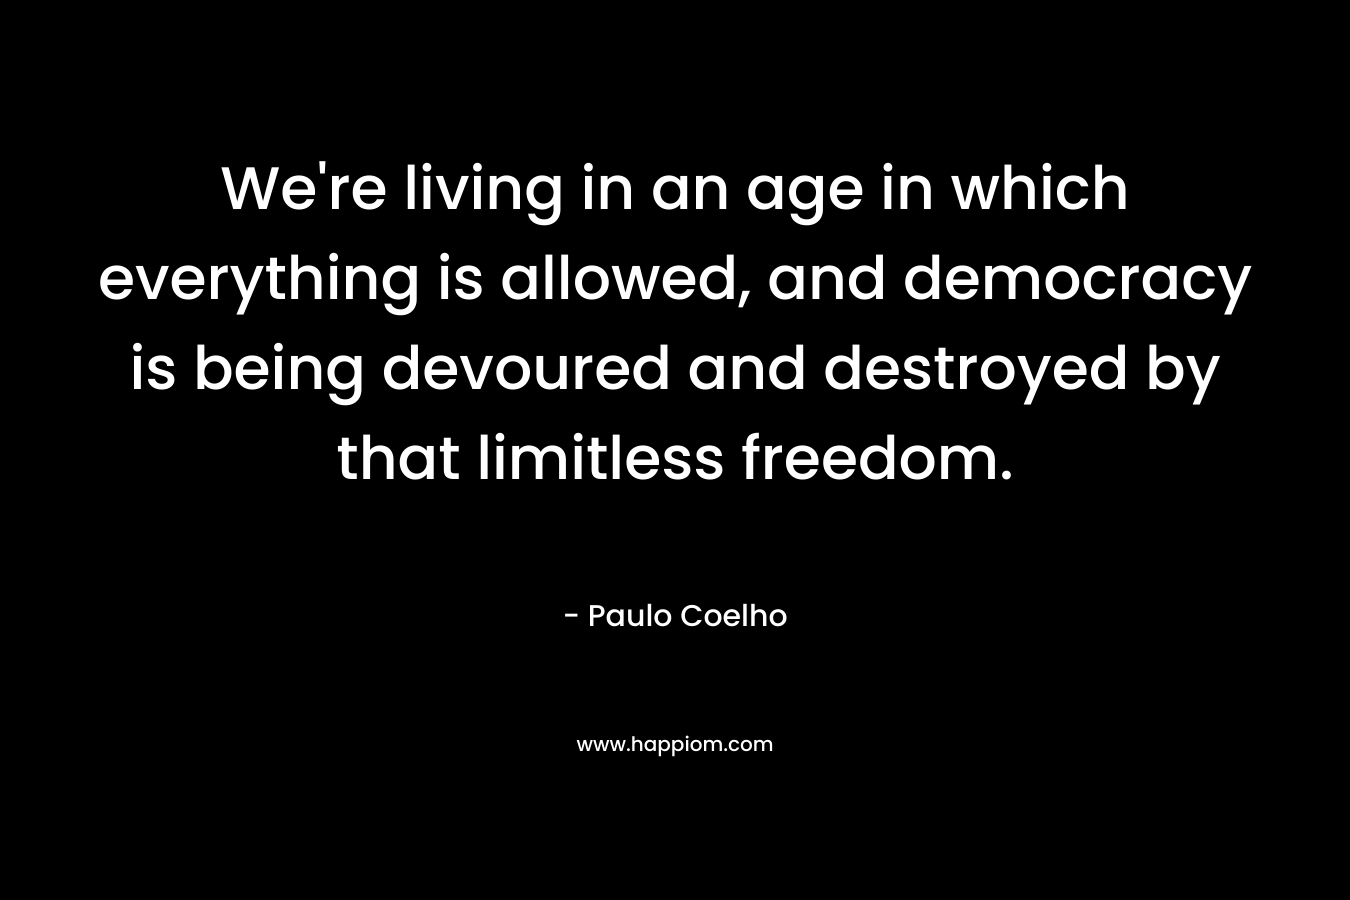 We're living in an age in which everything is allowed, and democracy is being devoured and destroyed by that limitless freedom.